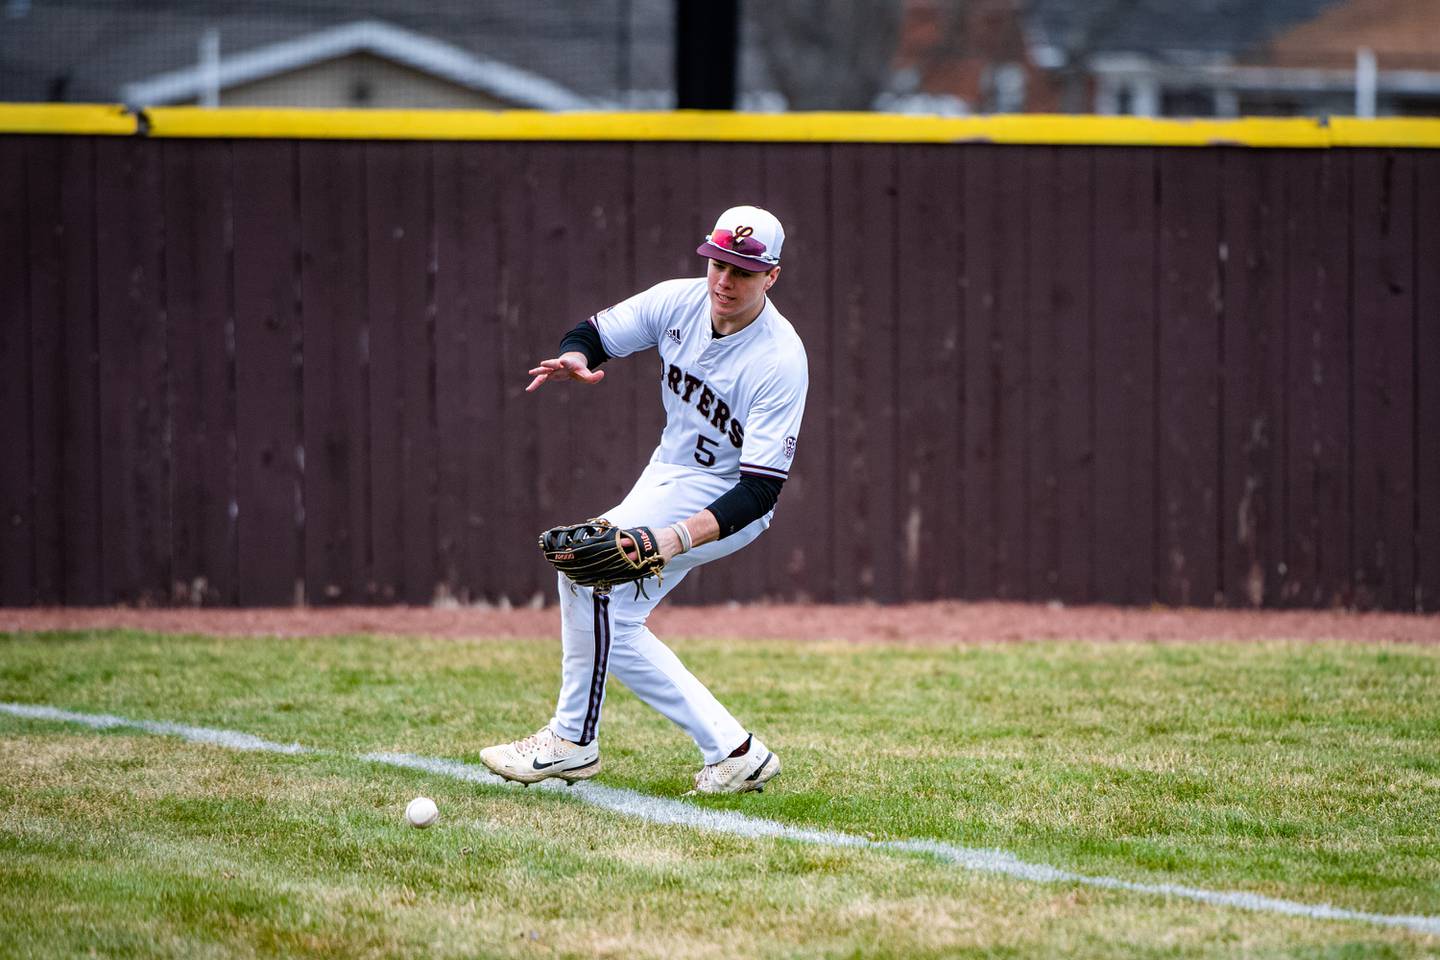 Lockport's Jake Moerman fields the ball during a game against Joliet Catholic on Friday, March 24, 2023, at Flink Field in Lockport.